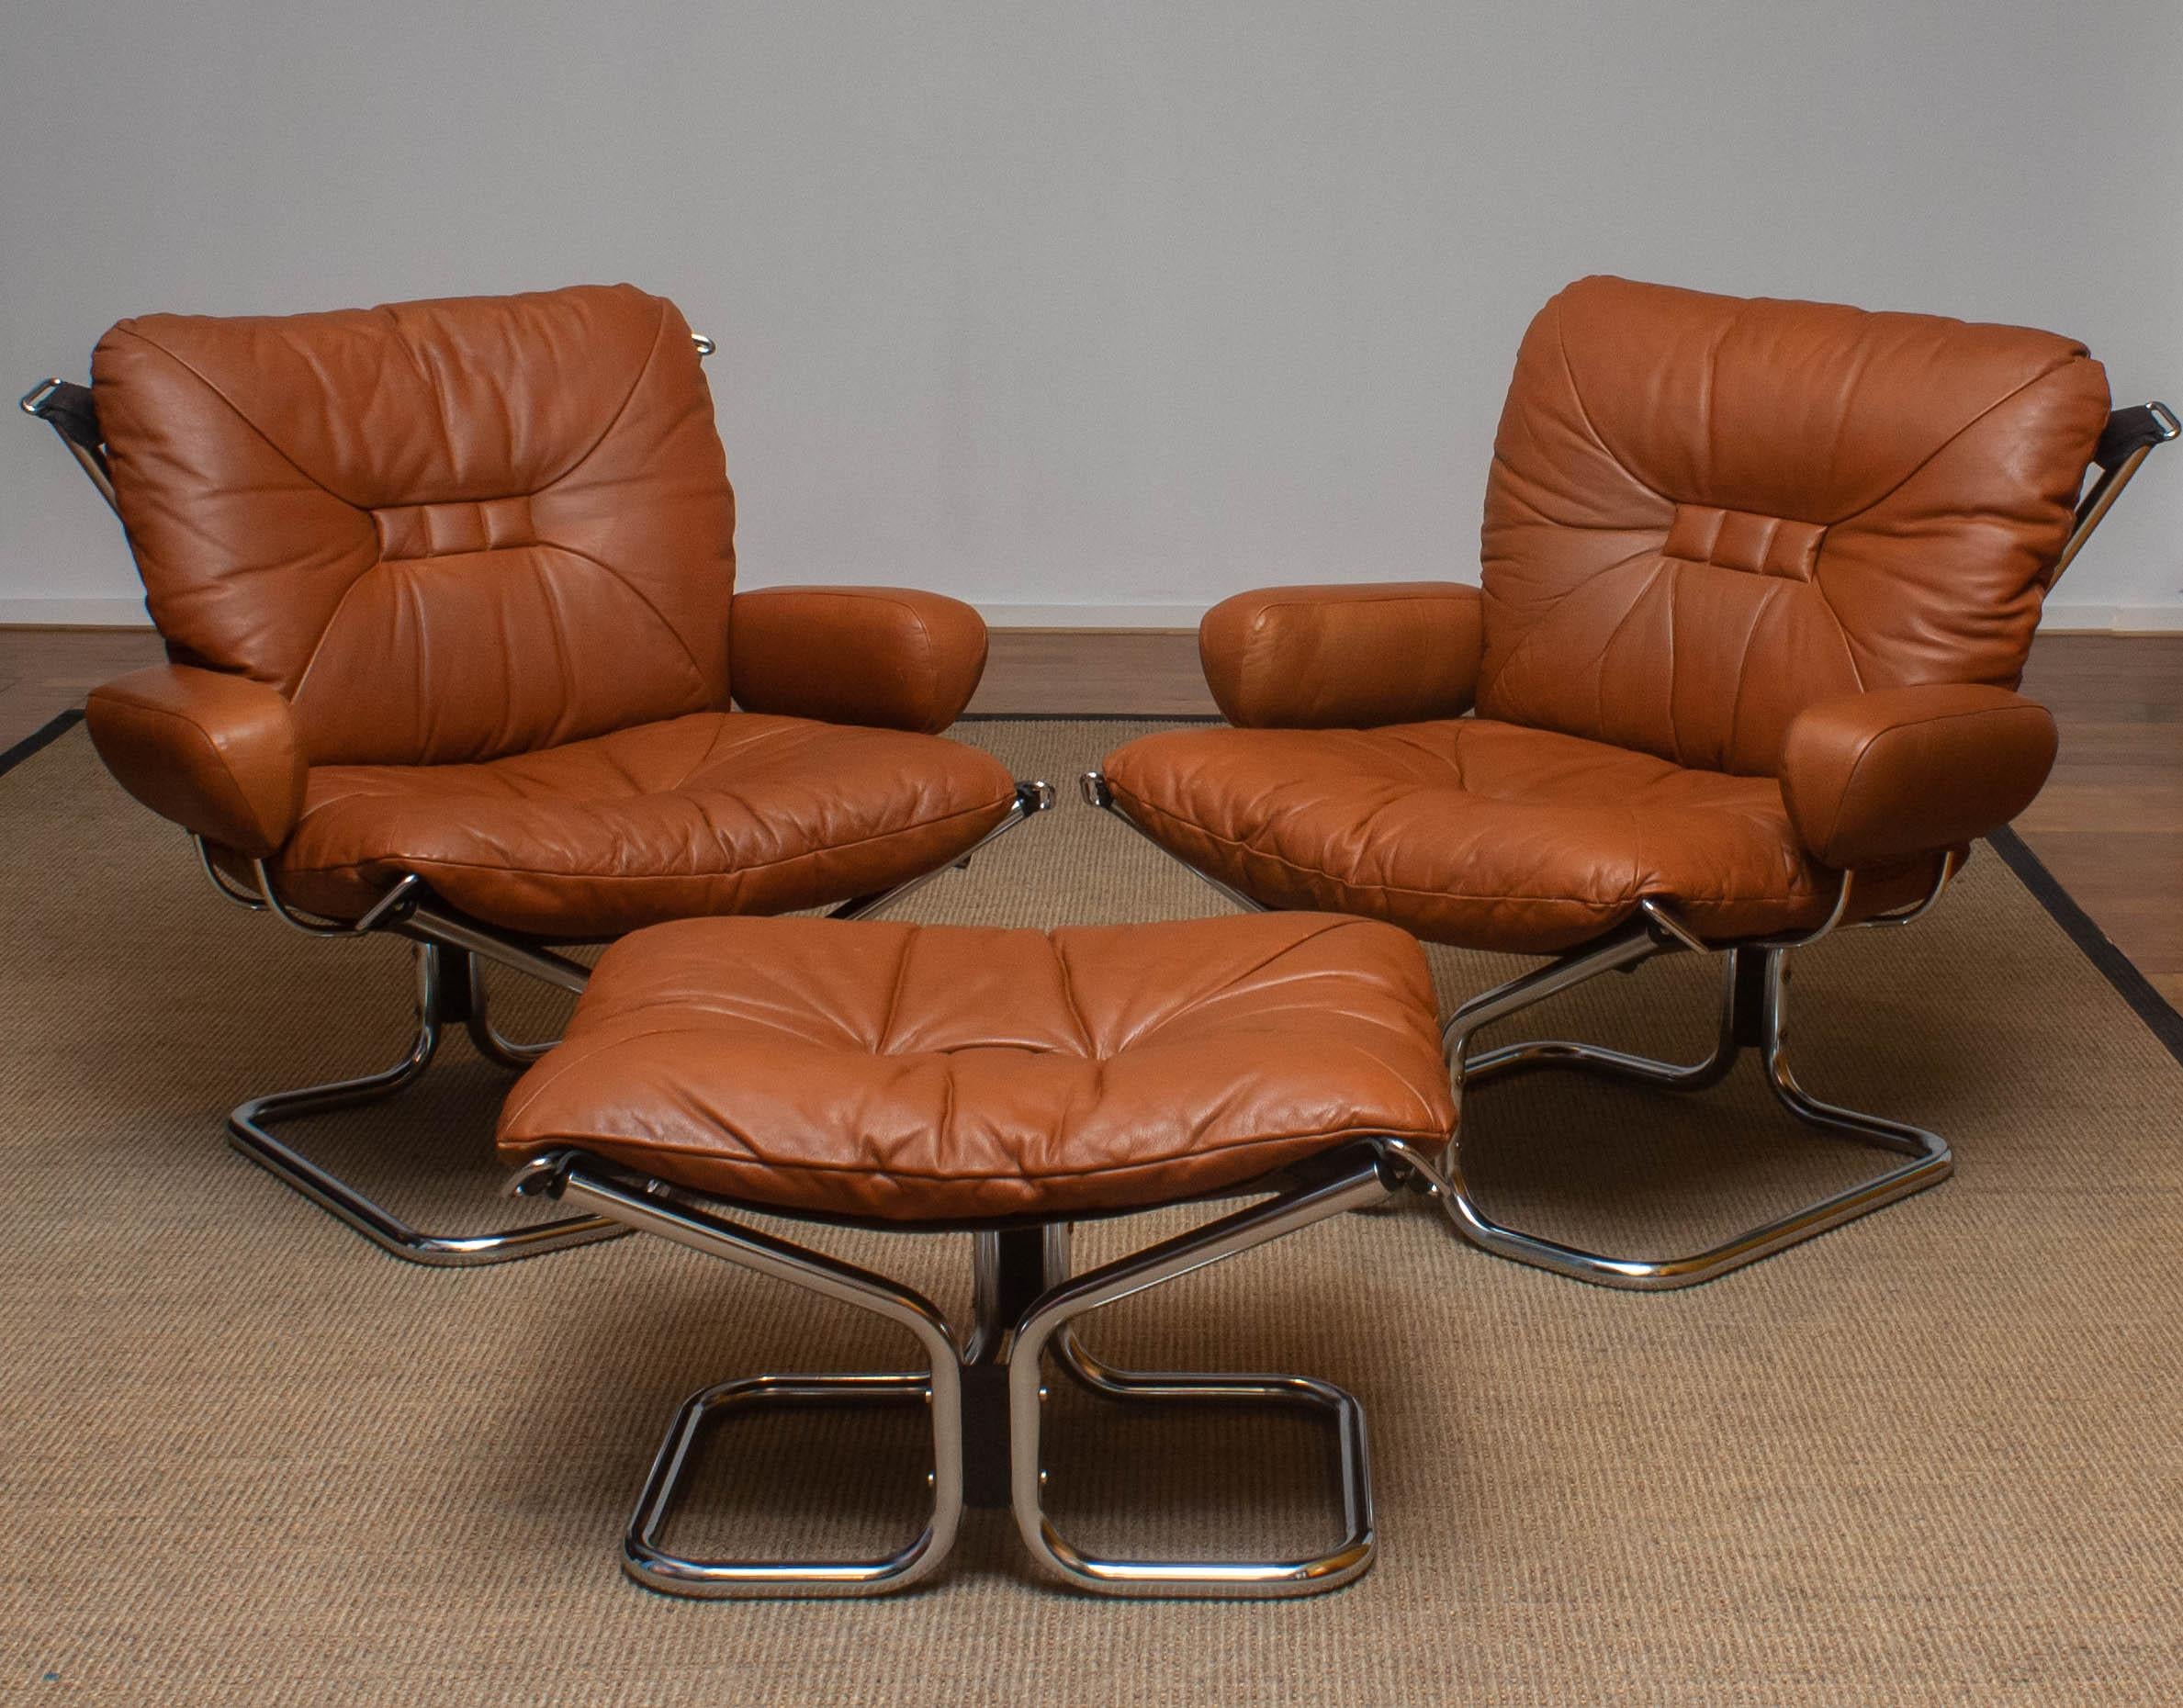 1970s Lounge Set Cognac Leather and Steel by Harald Relling for Westnofa, Norway 1